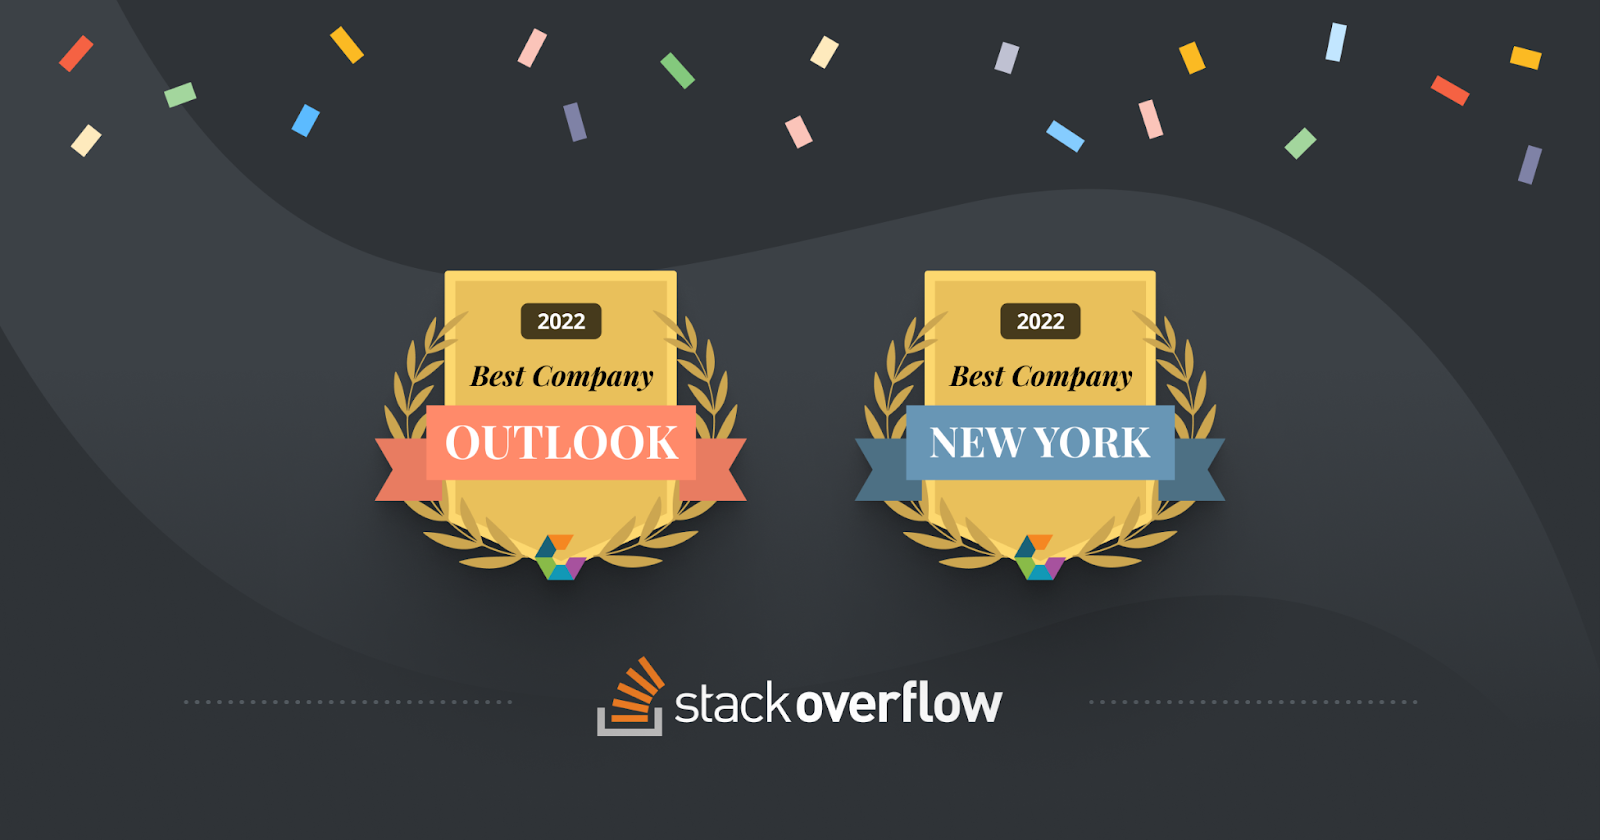 Stack Overflow awards for Best Company Outlook and Best Company New York, 2022. 